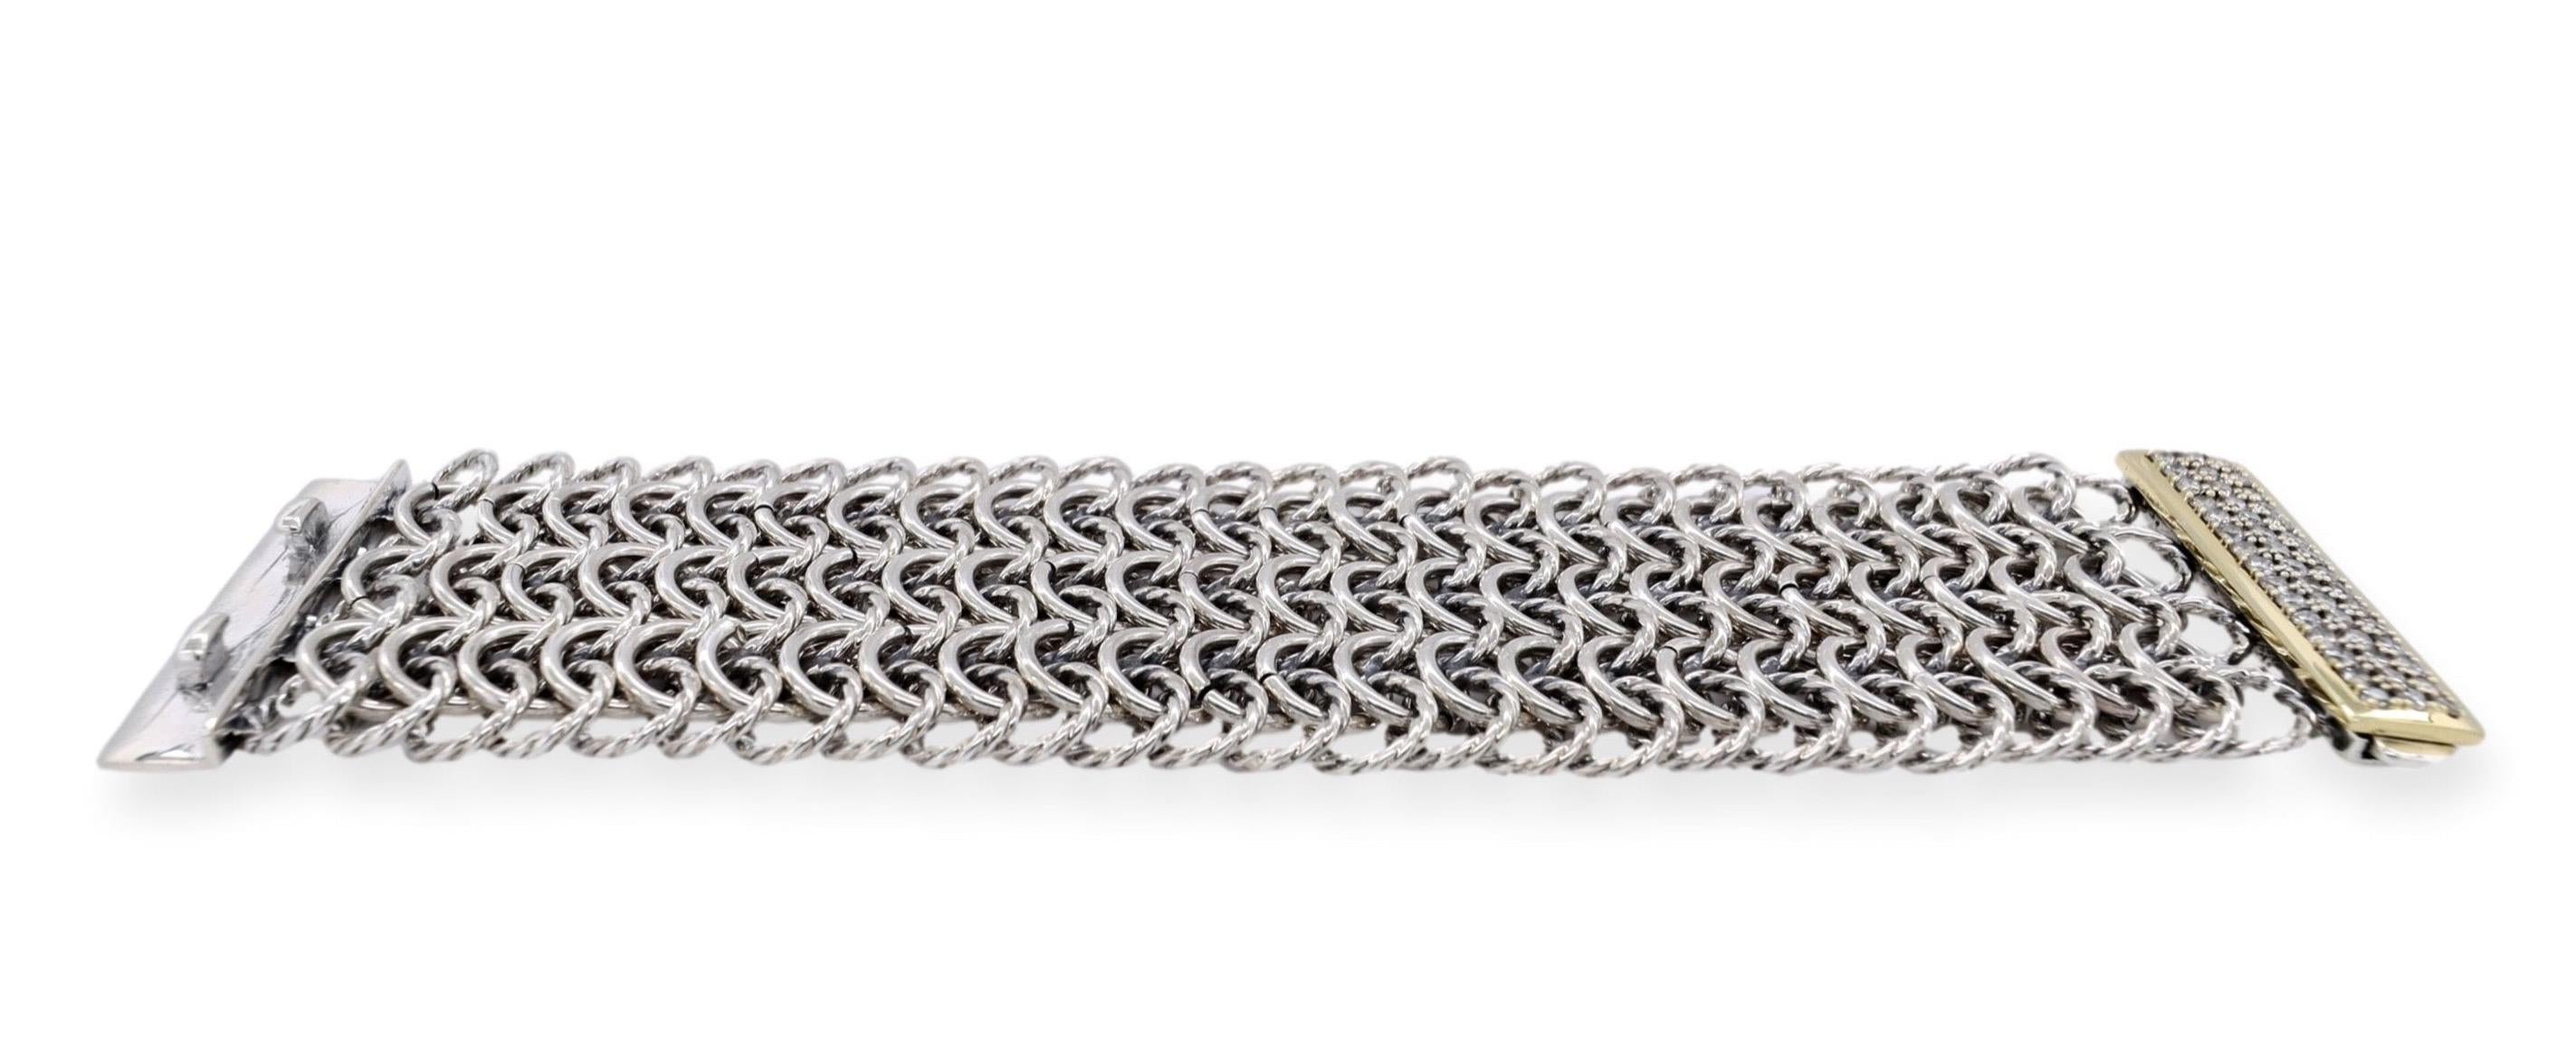 Vintage David Yurman bracelet finely crafted in sterling silver featuring a diamond clasp with round brilliants weighing 2 carats total weight approximately set in prongs inside an 18K yellow gold bezel frame. Bracelet has five rows of interlocking